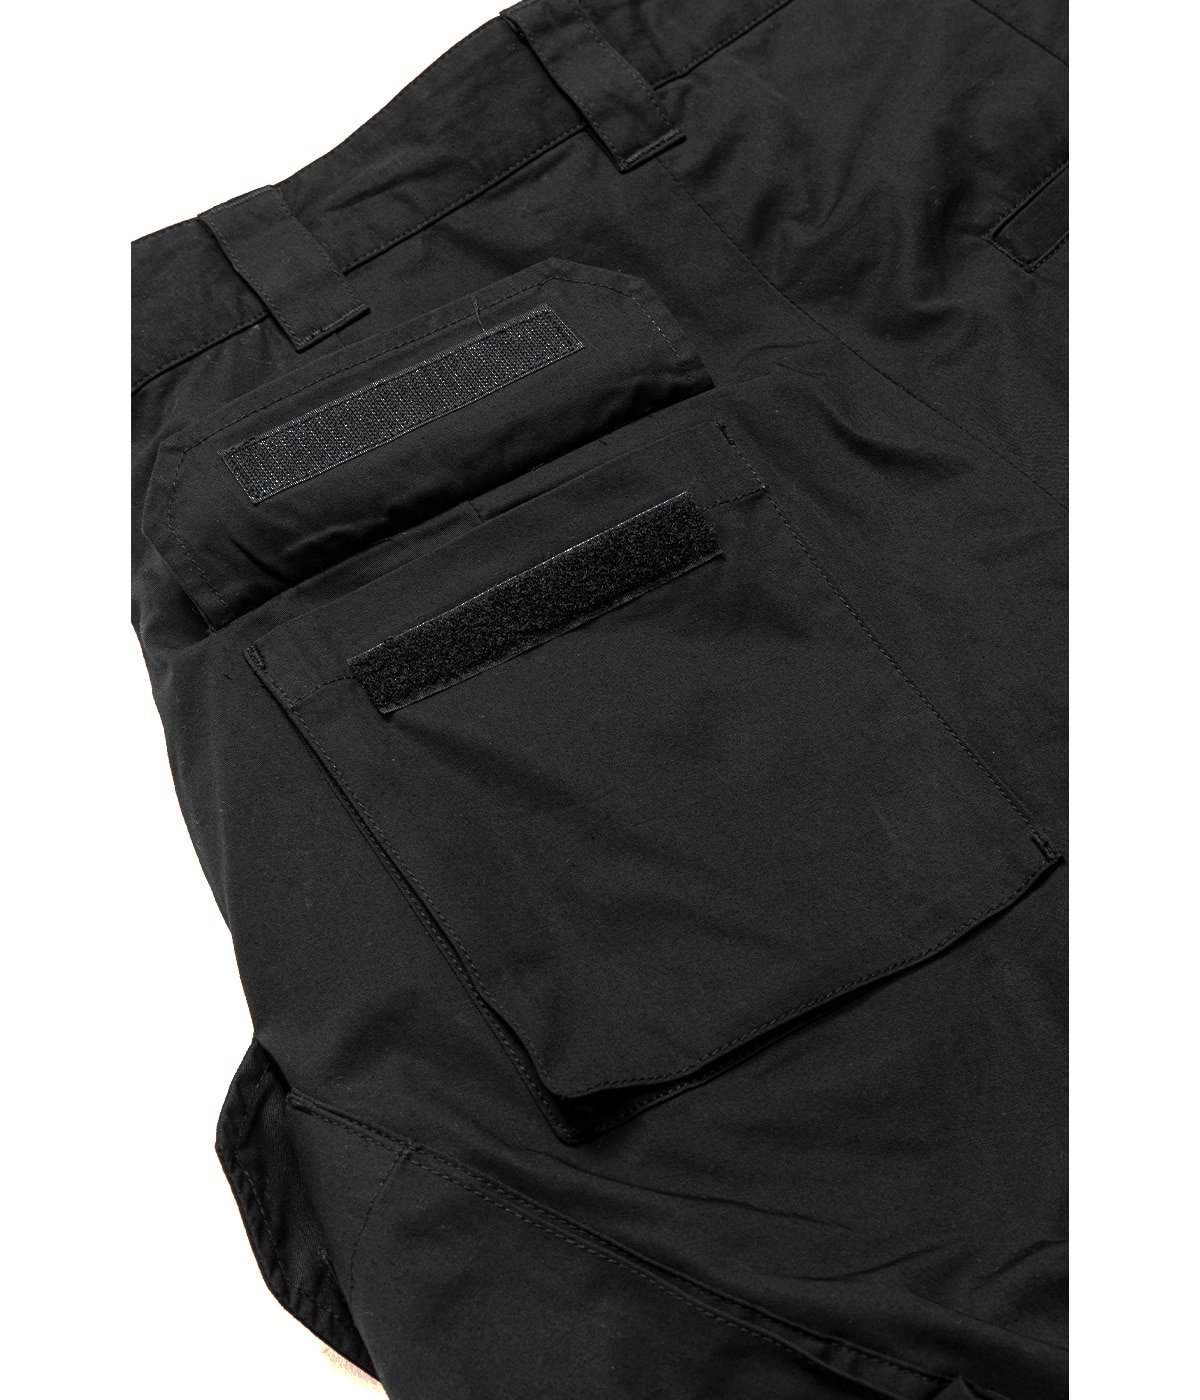 MOUT RECON TAILOR(マウトリーコンテーラー) MDU Pant / パンツ 